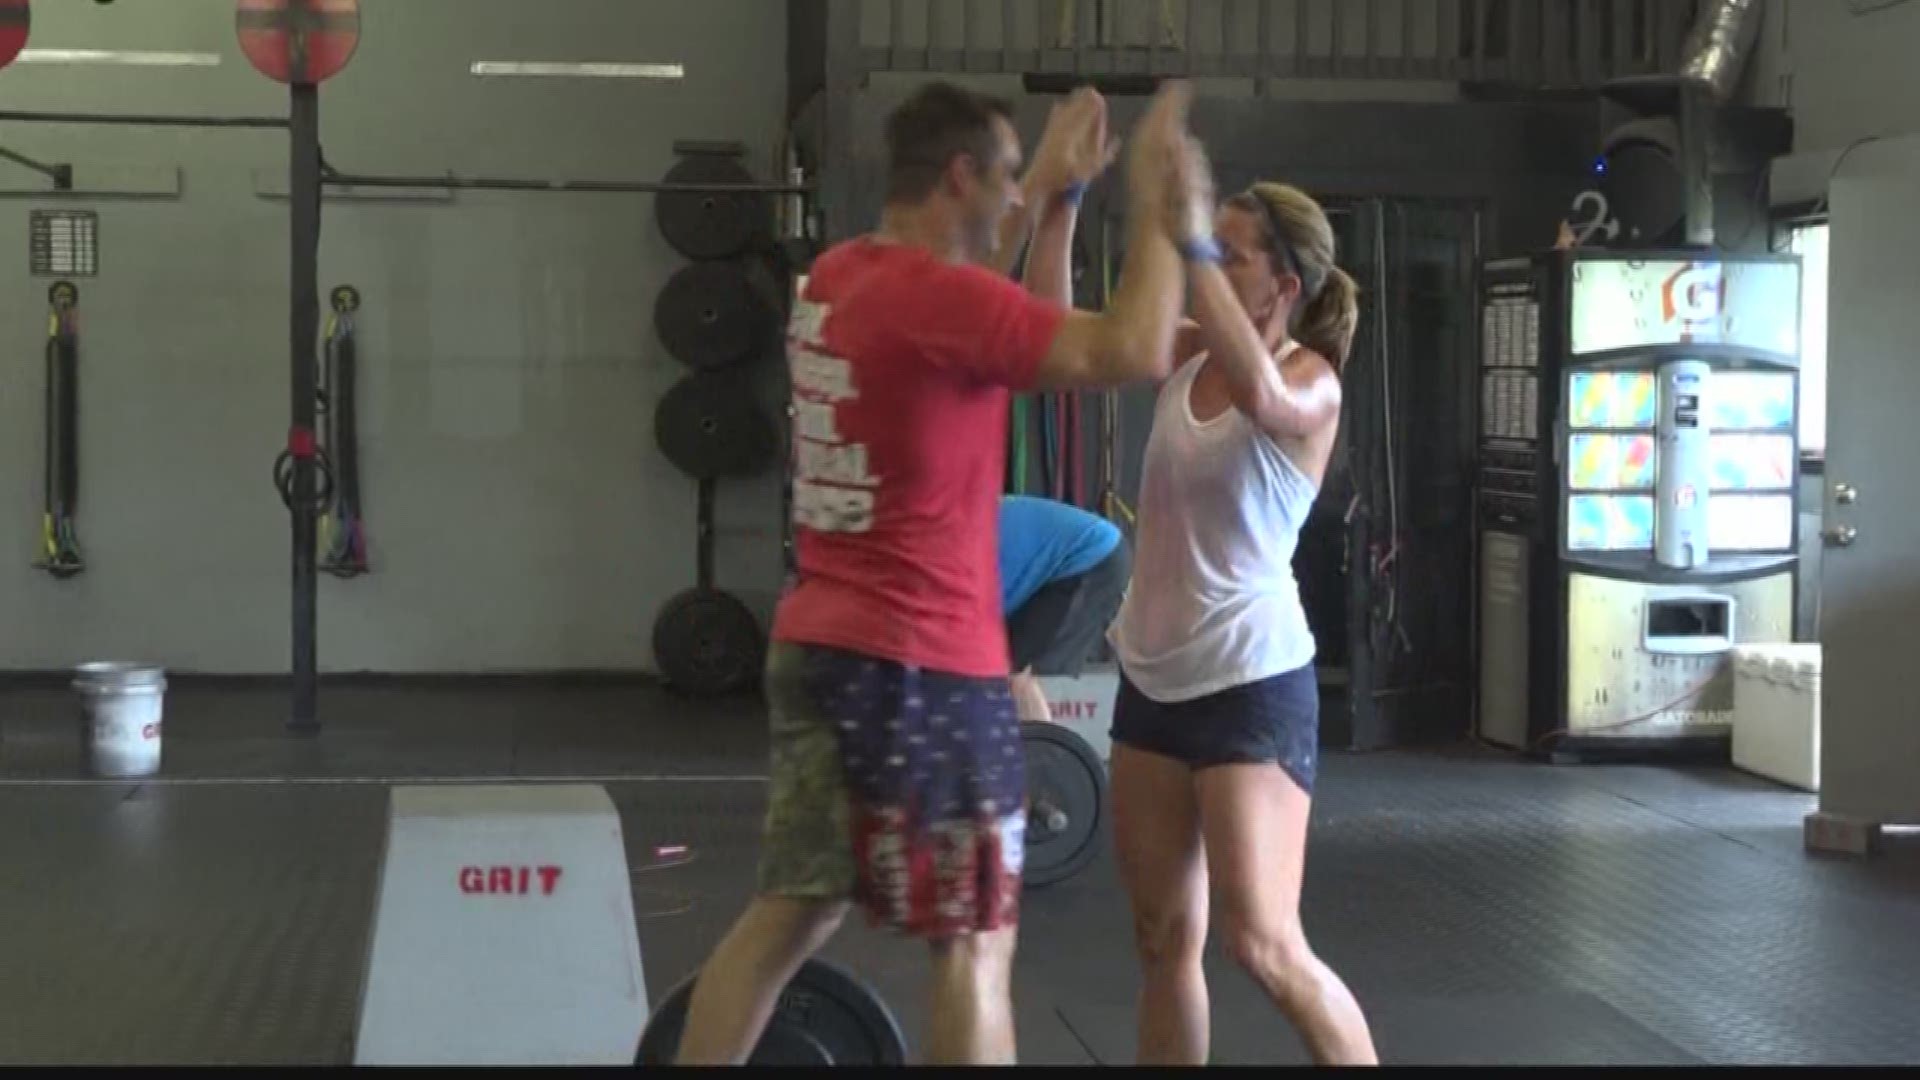 He says crossfit helps him be prepared for his community by making him stronger